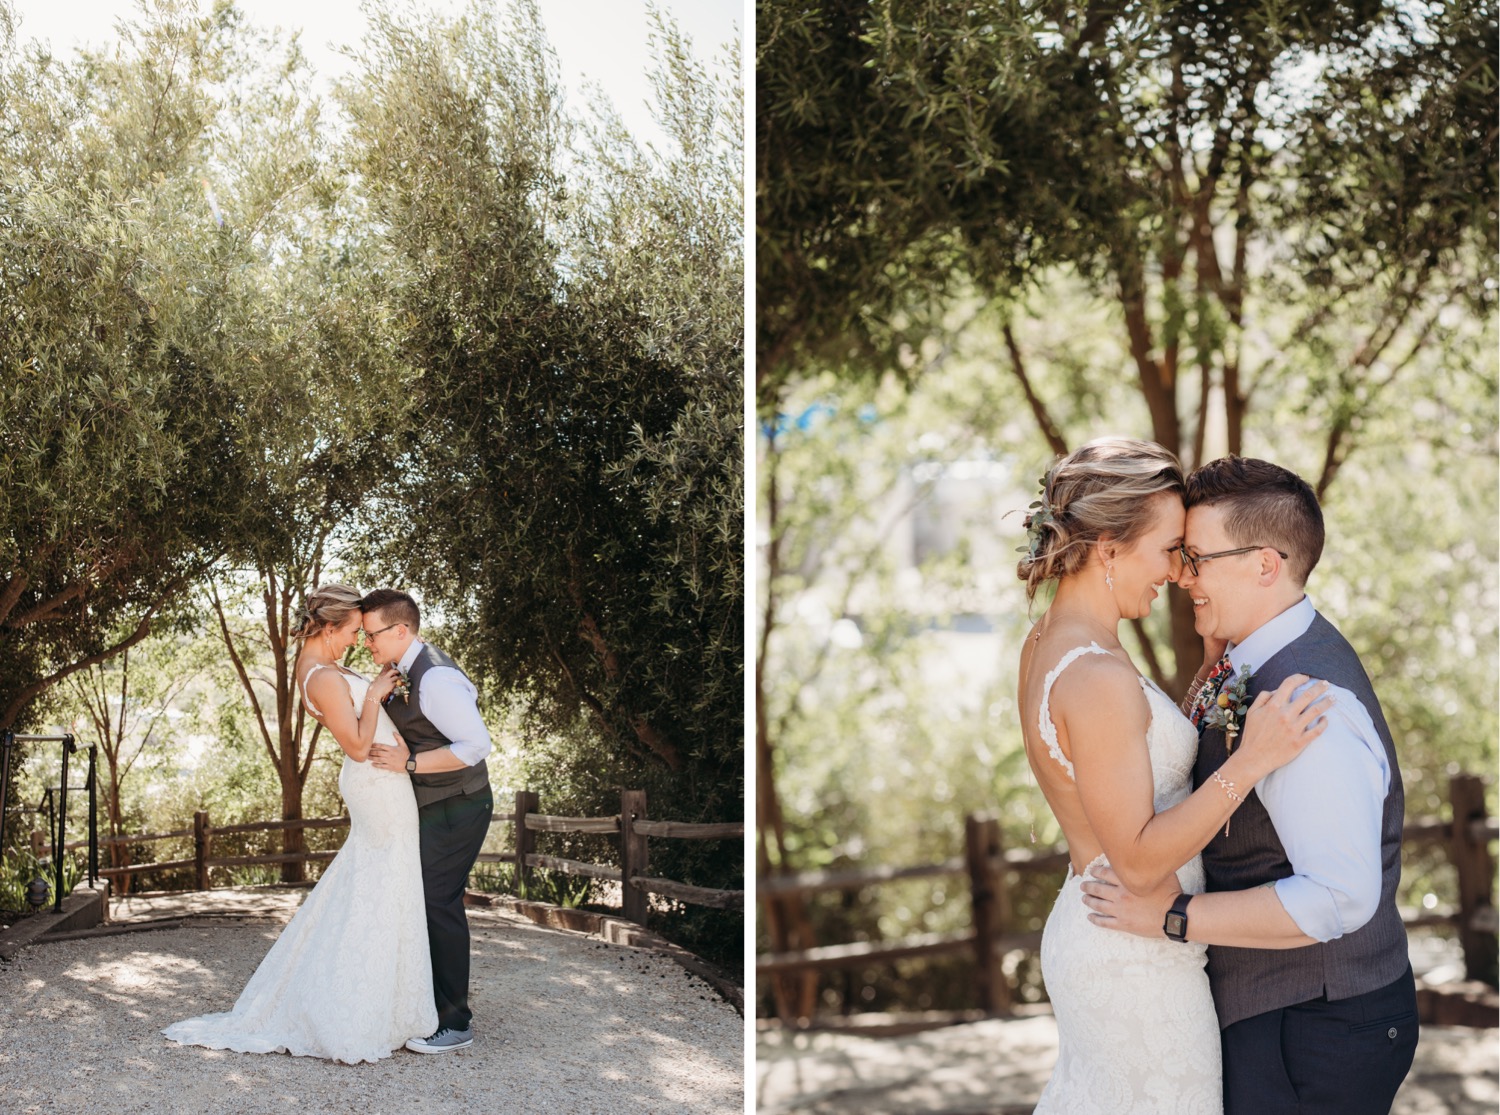 Brides embrace in the center of a tree lined path. Liz Koston Photography.